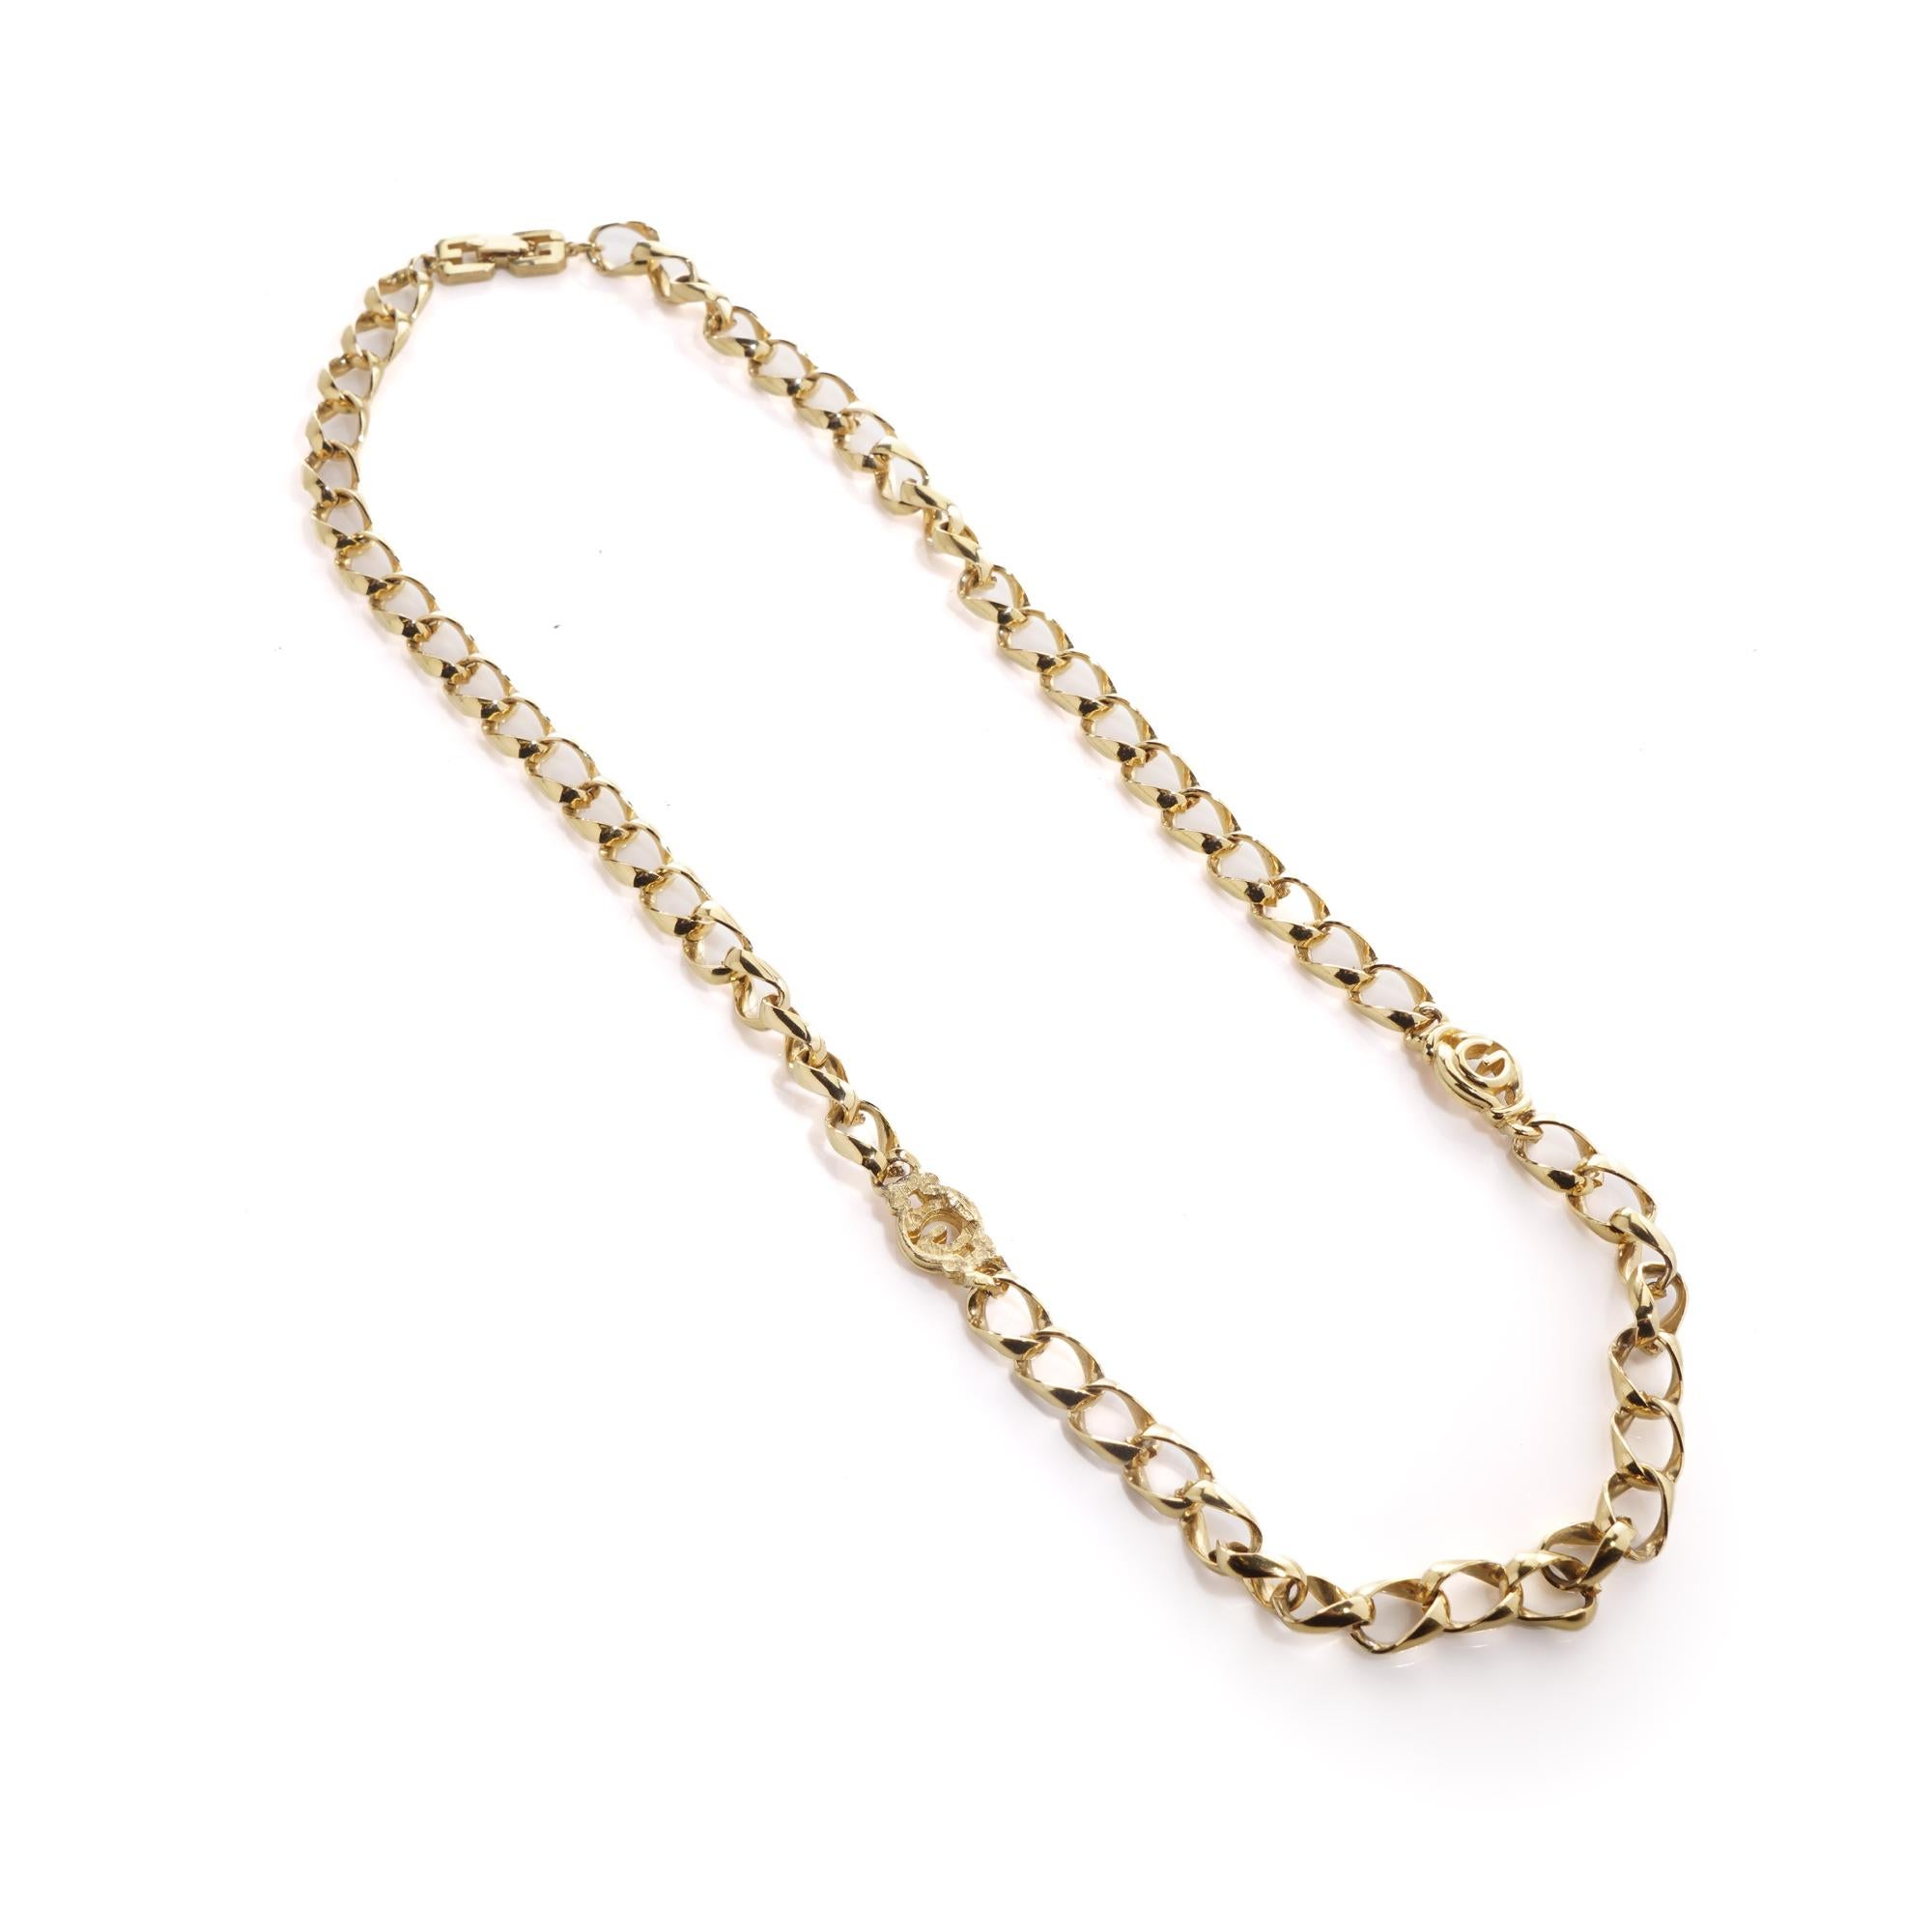 Vintage Givenchy long link chain necklace In Good Condition For Sale In Braintree, GB